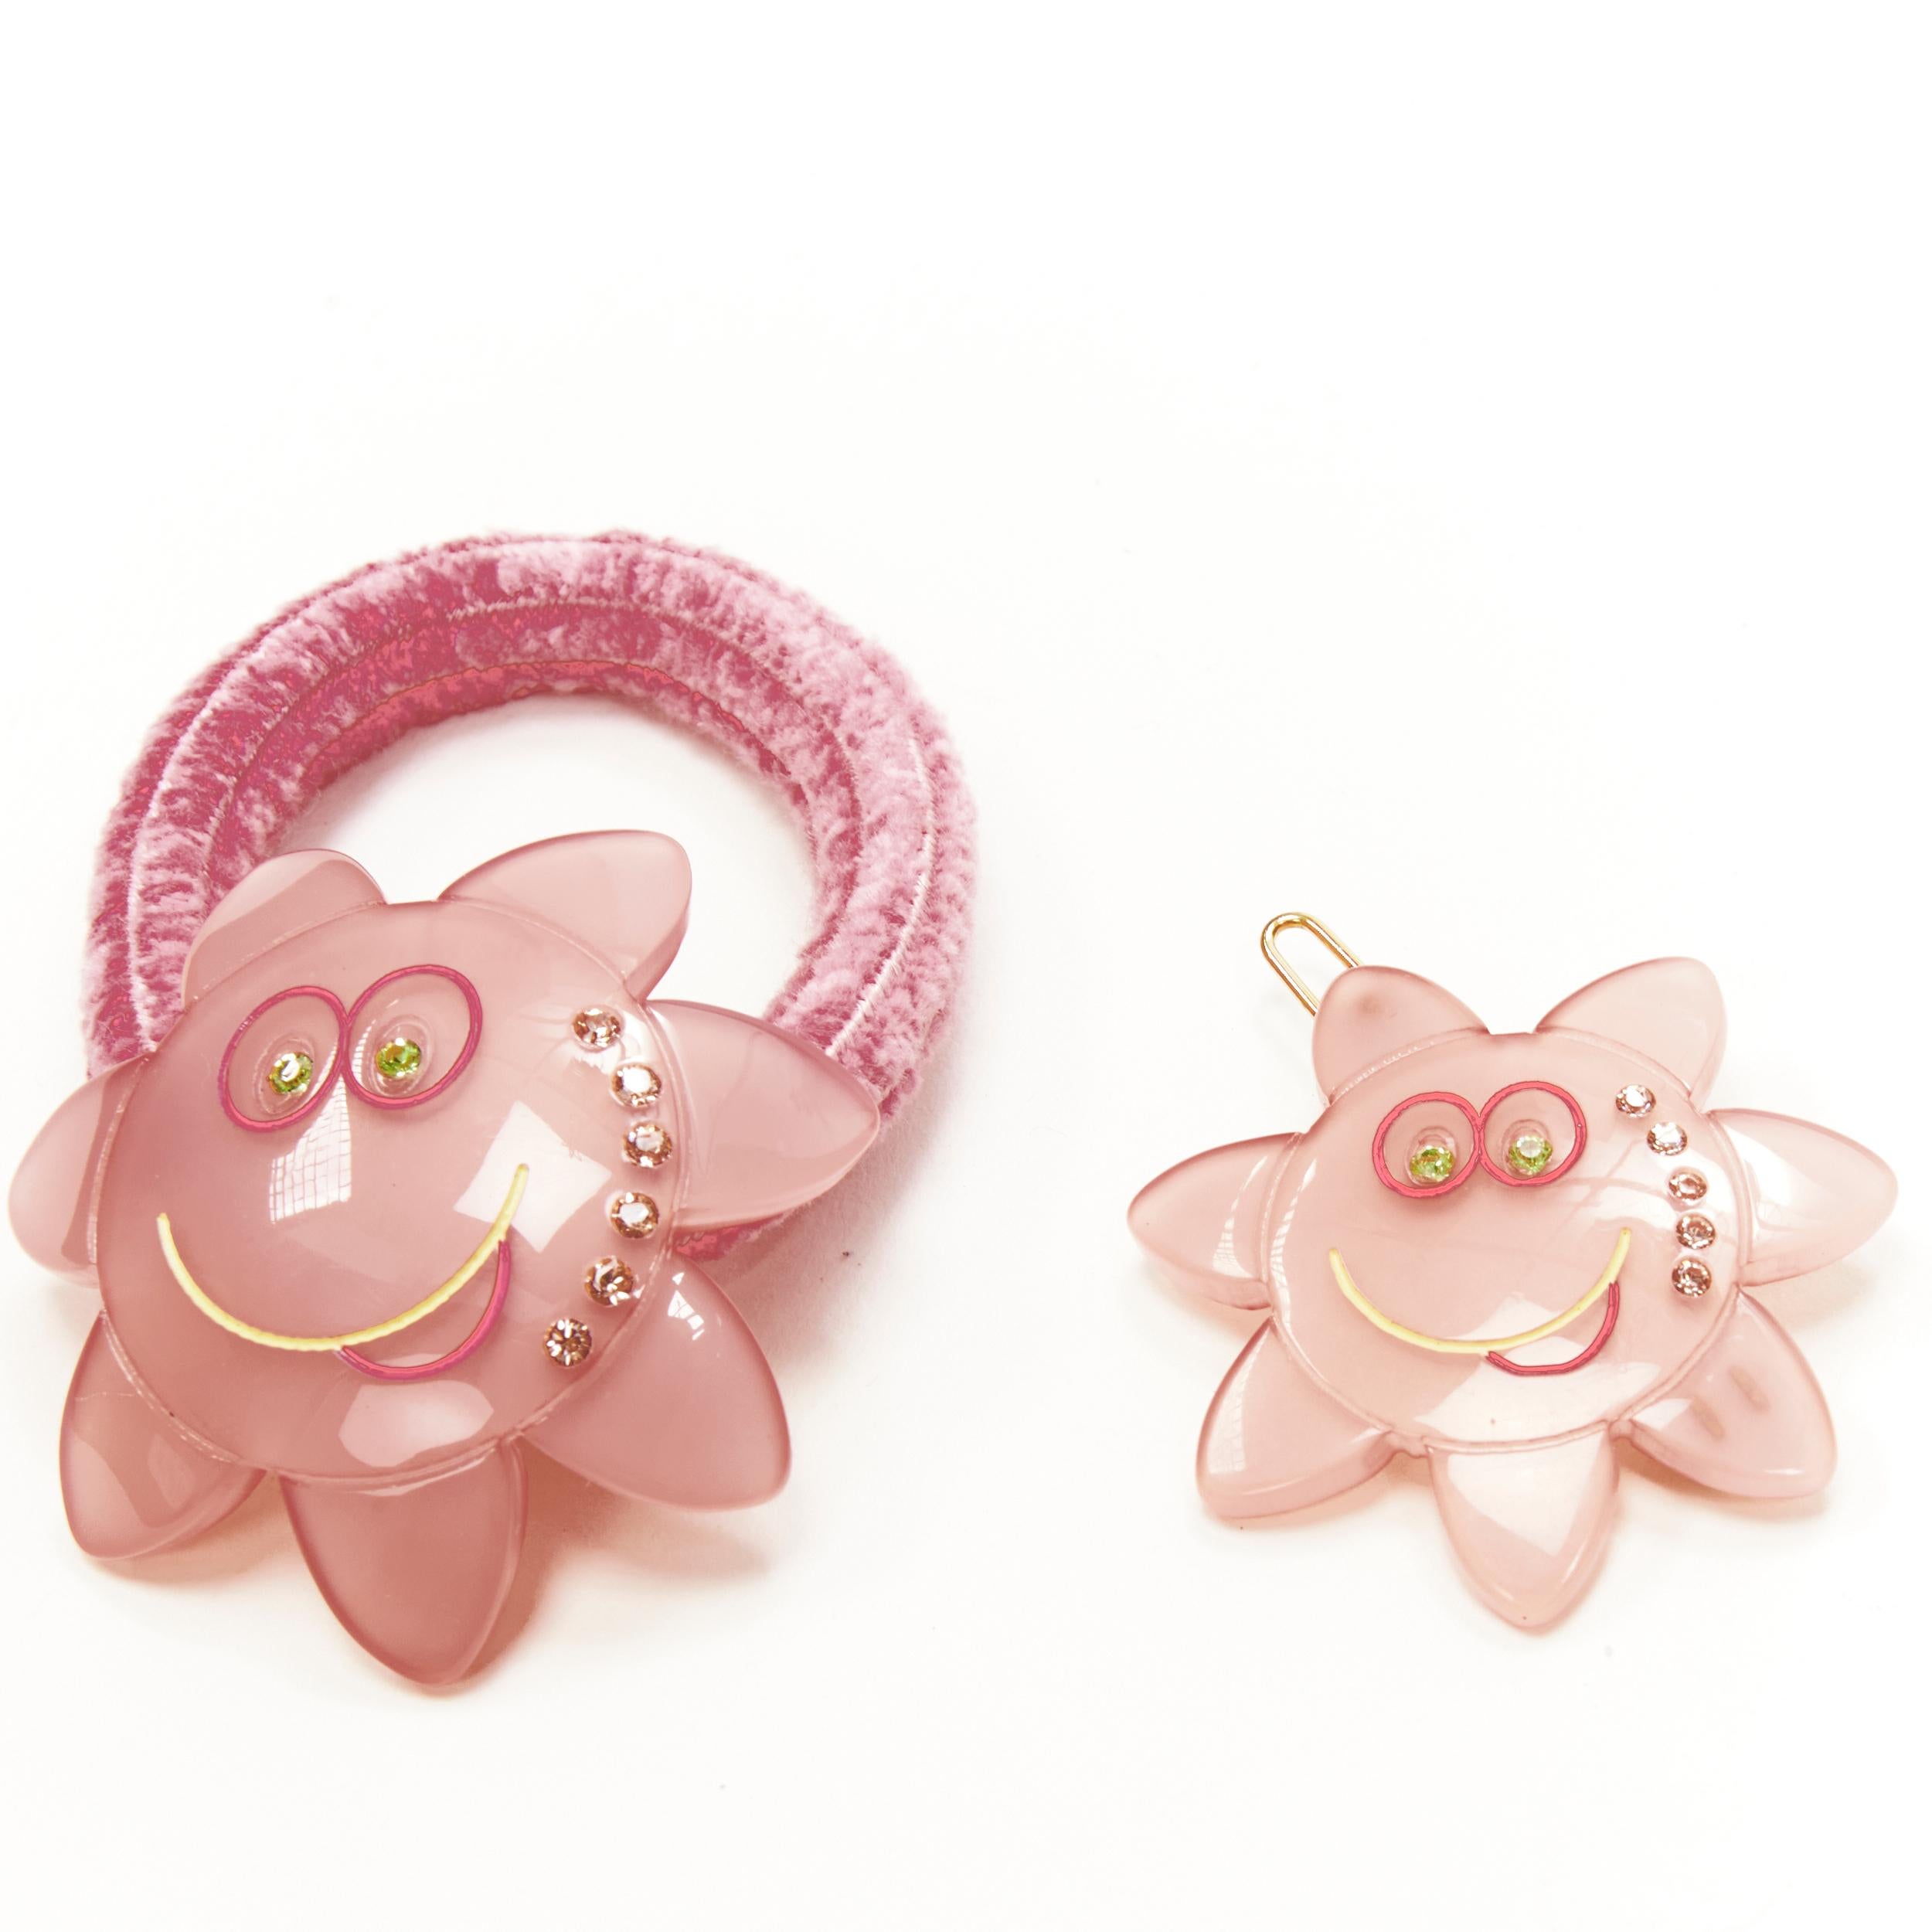 CHIC & MODE Alexandre Zouari pink crystal smiley flower acrylic hair tie clip X2
Reference: ANWU/A00250
Brand: Chic and Mode
Designer: Alexandre Zouari
Material: Plastic, Metal
Color: Pink
Closure: Clip On
Extra Details: Hair clip ~4cm. Hair tie